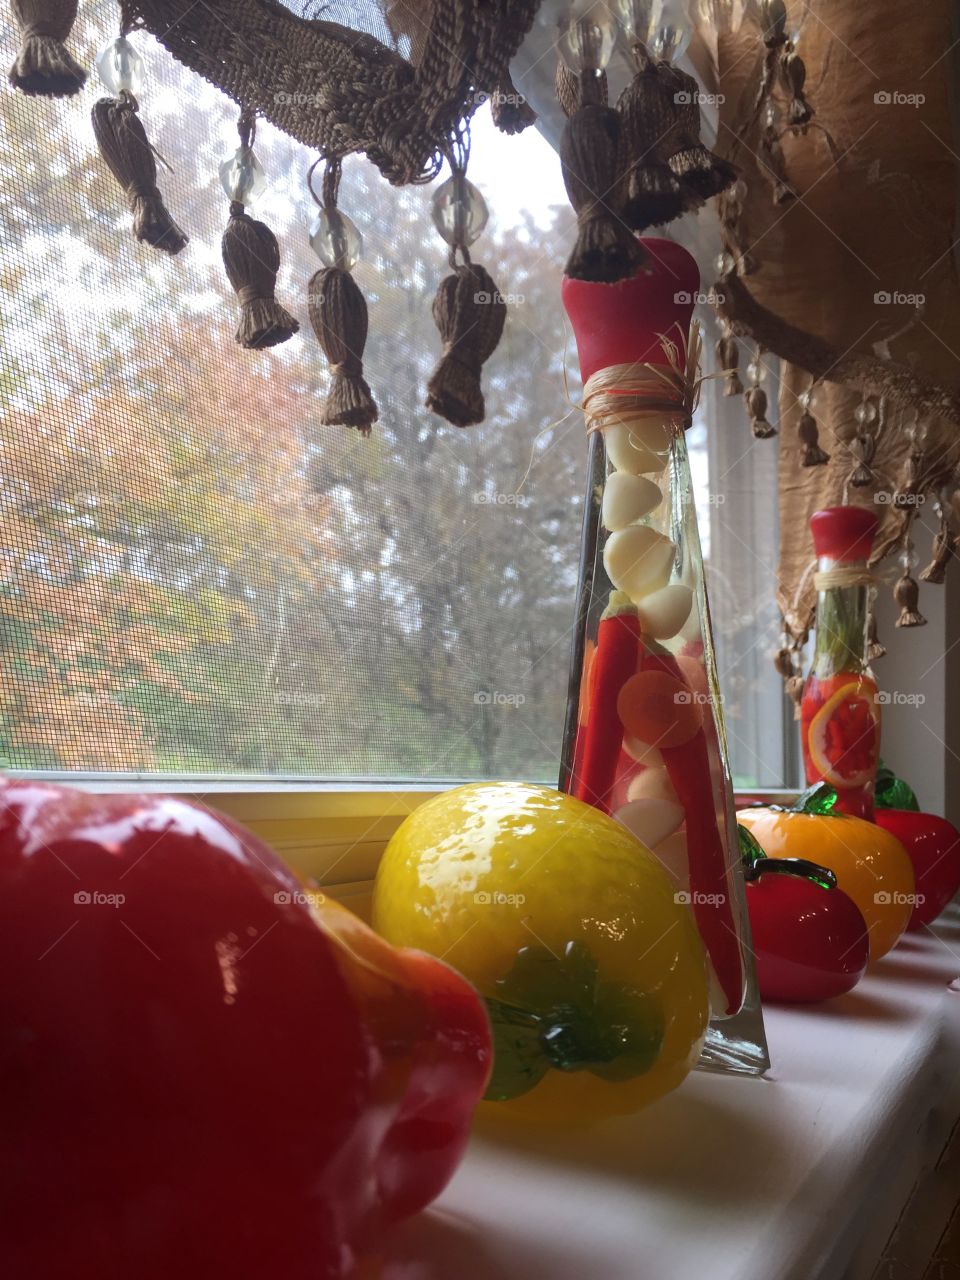 Kitchen window with bright colorful art glass vegetables 